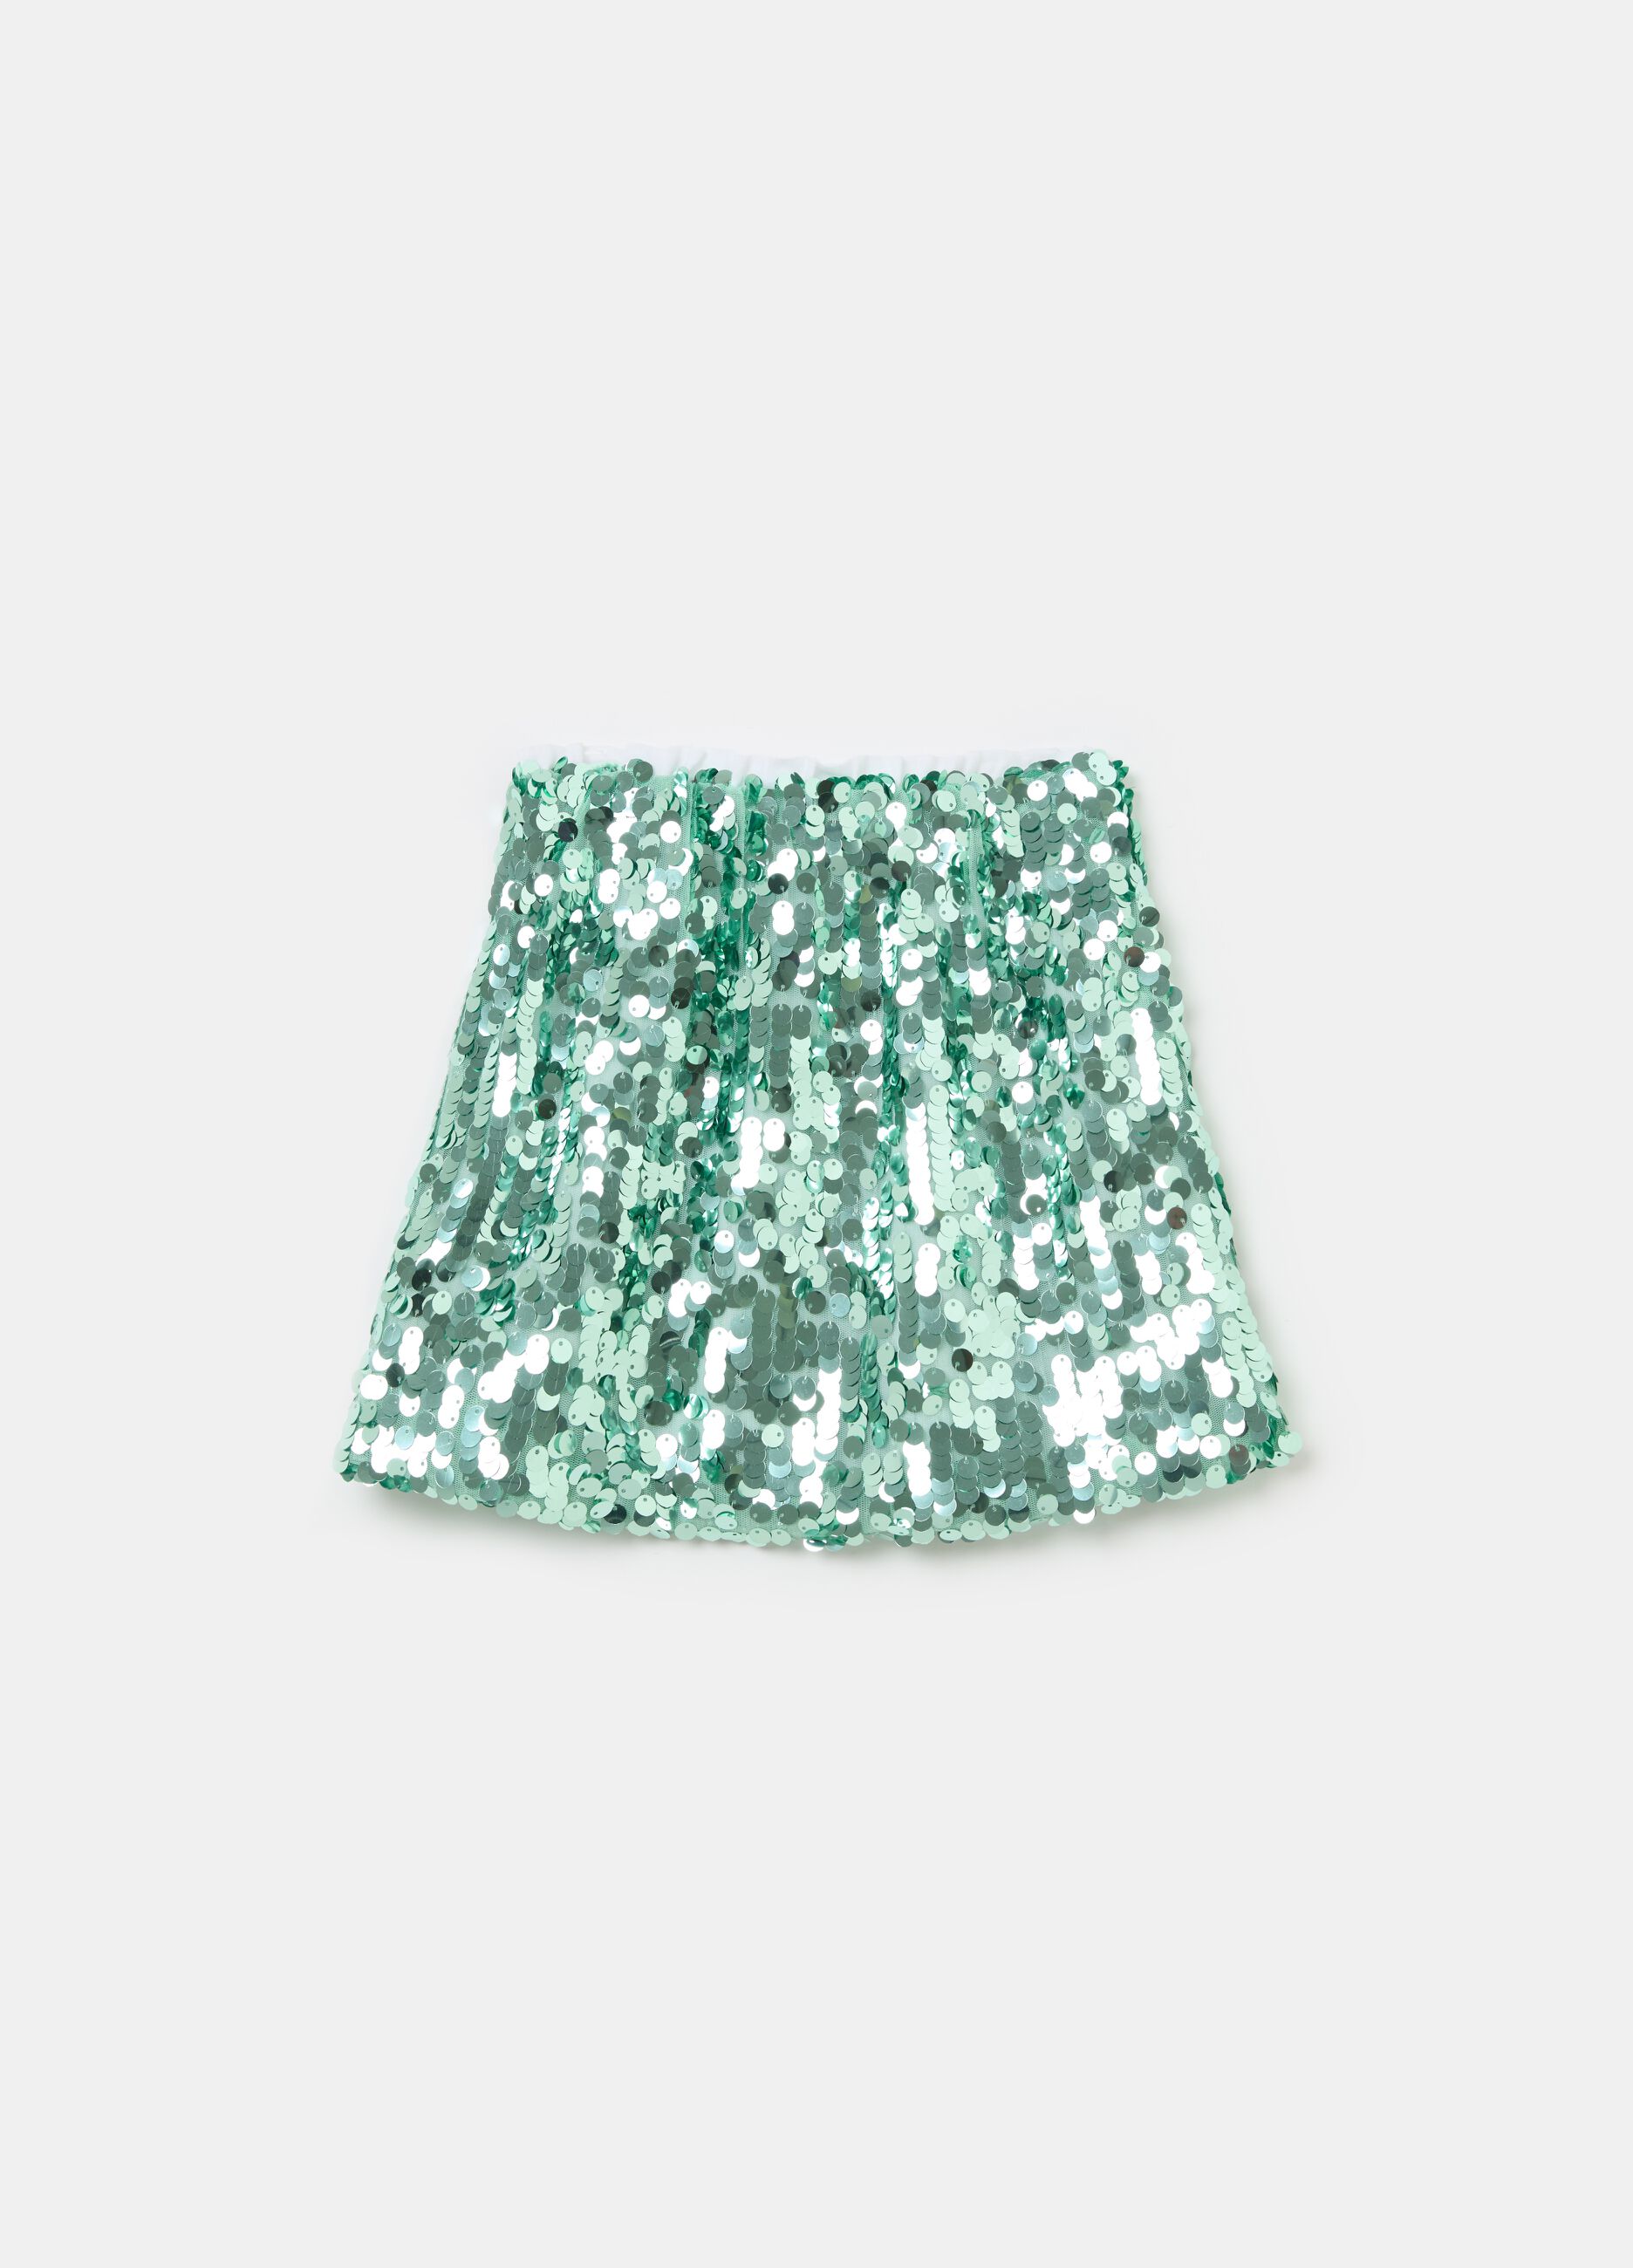 Short skirt with sequins